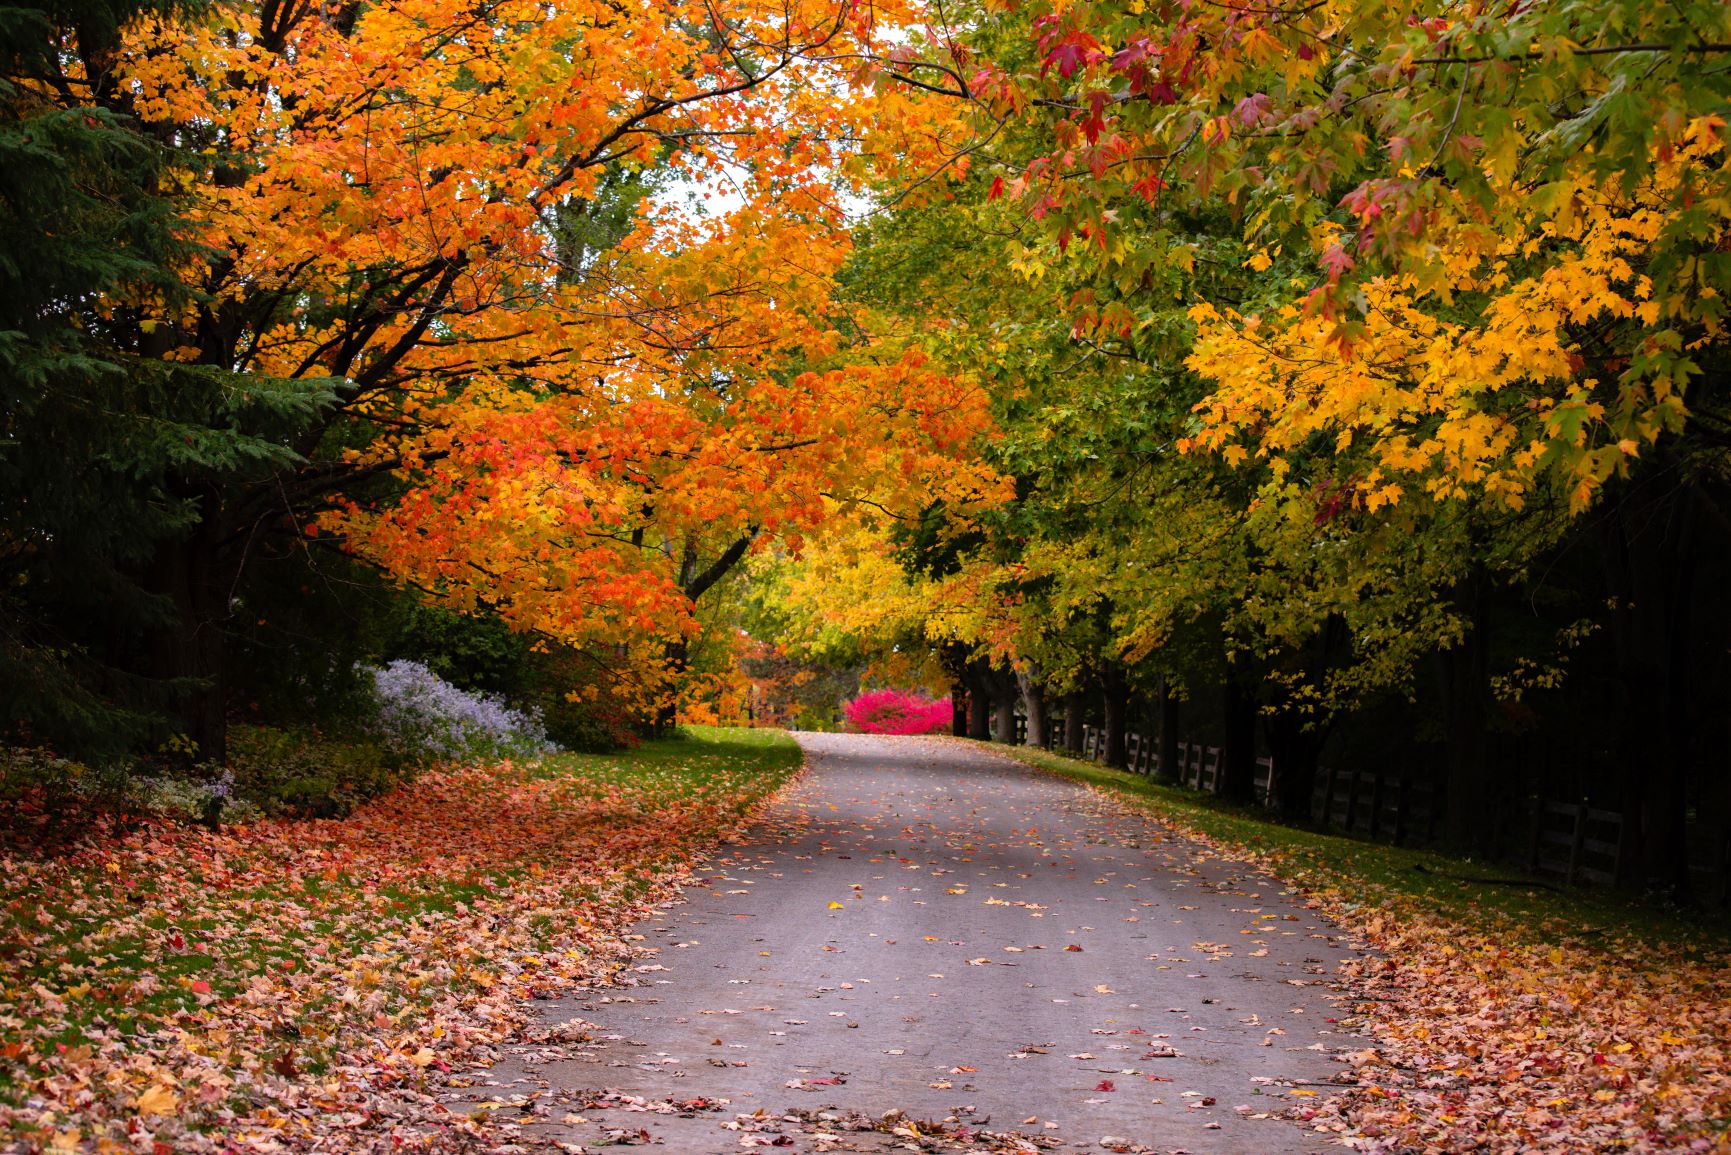 A forest road surrounded by trees in autumn colours of yellow, orange and red